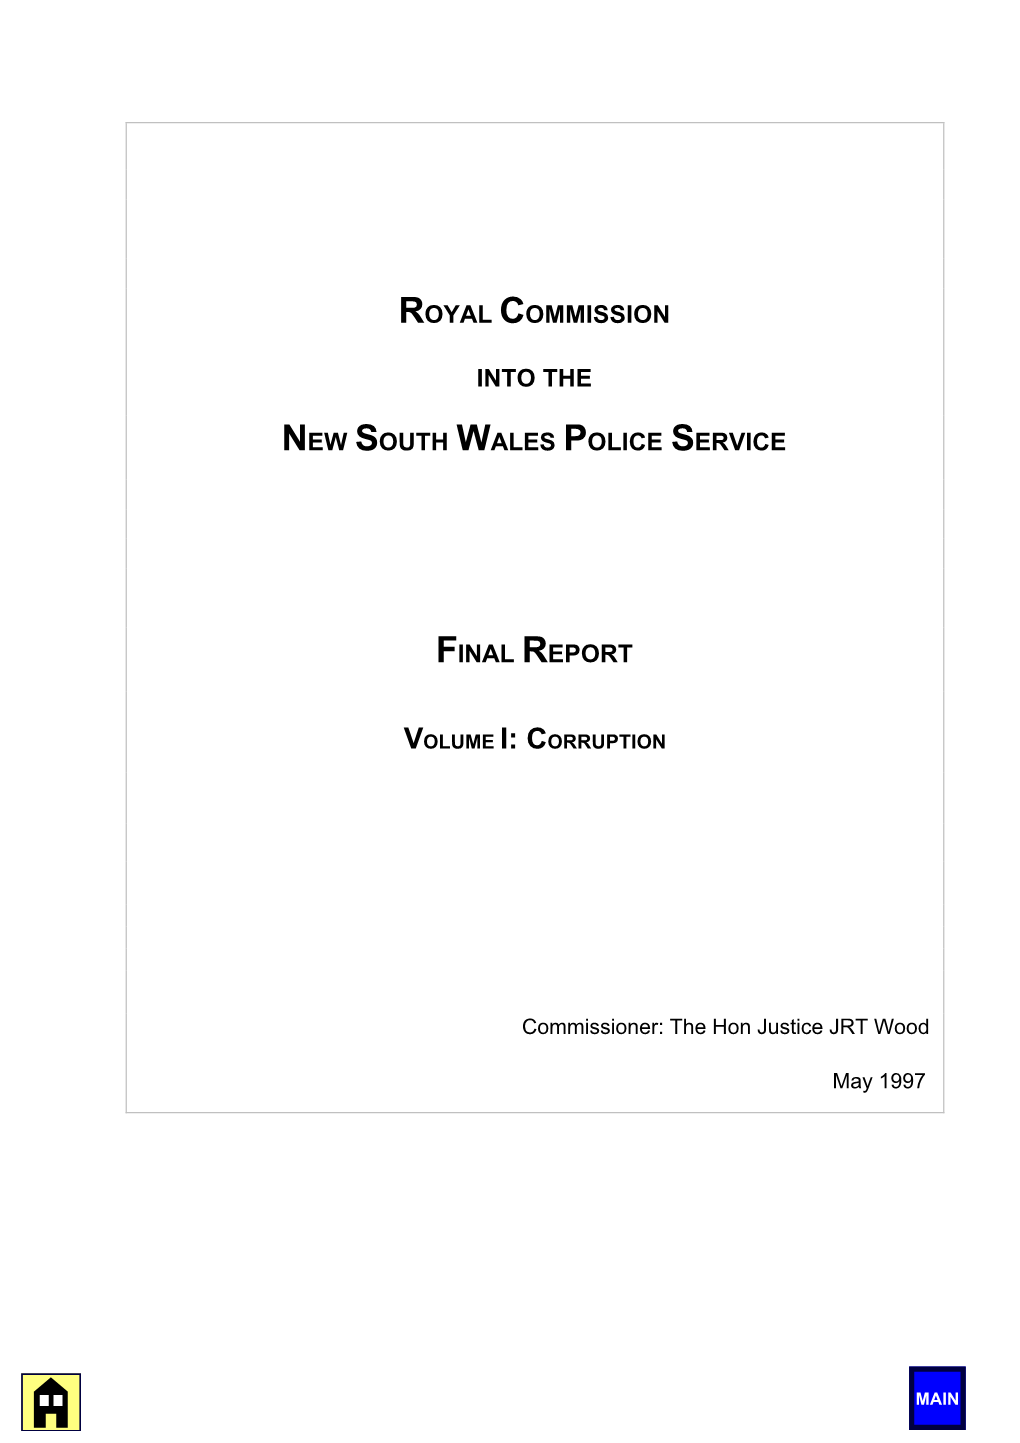 Royal Commission Into the New South Wales Police Service Final Report